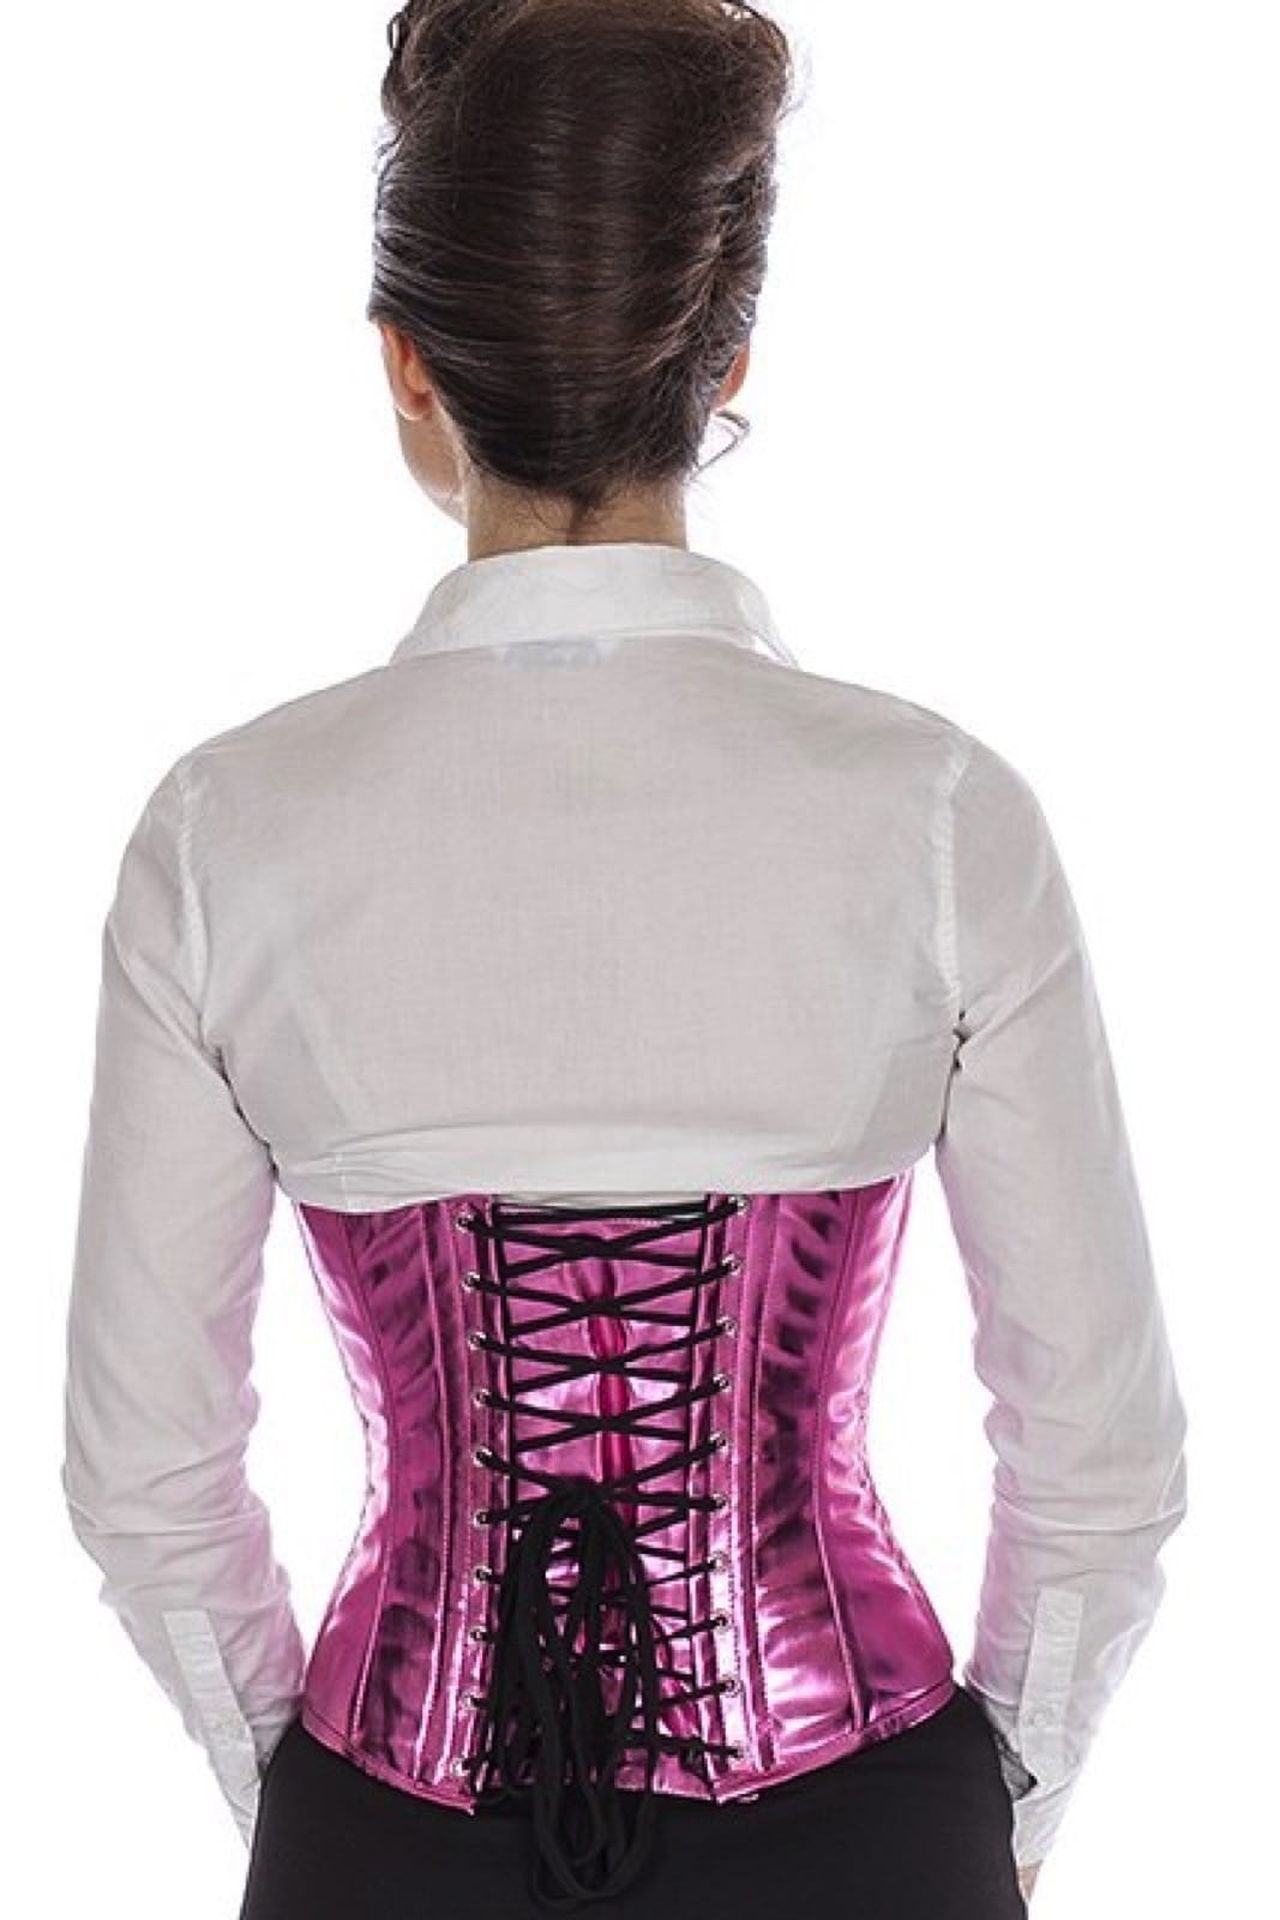 Corse pink glitter charol reductores corset pwG7